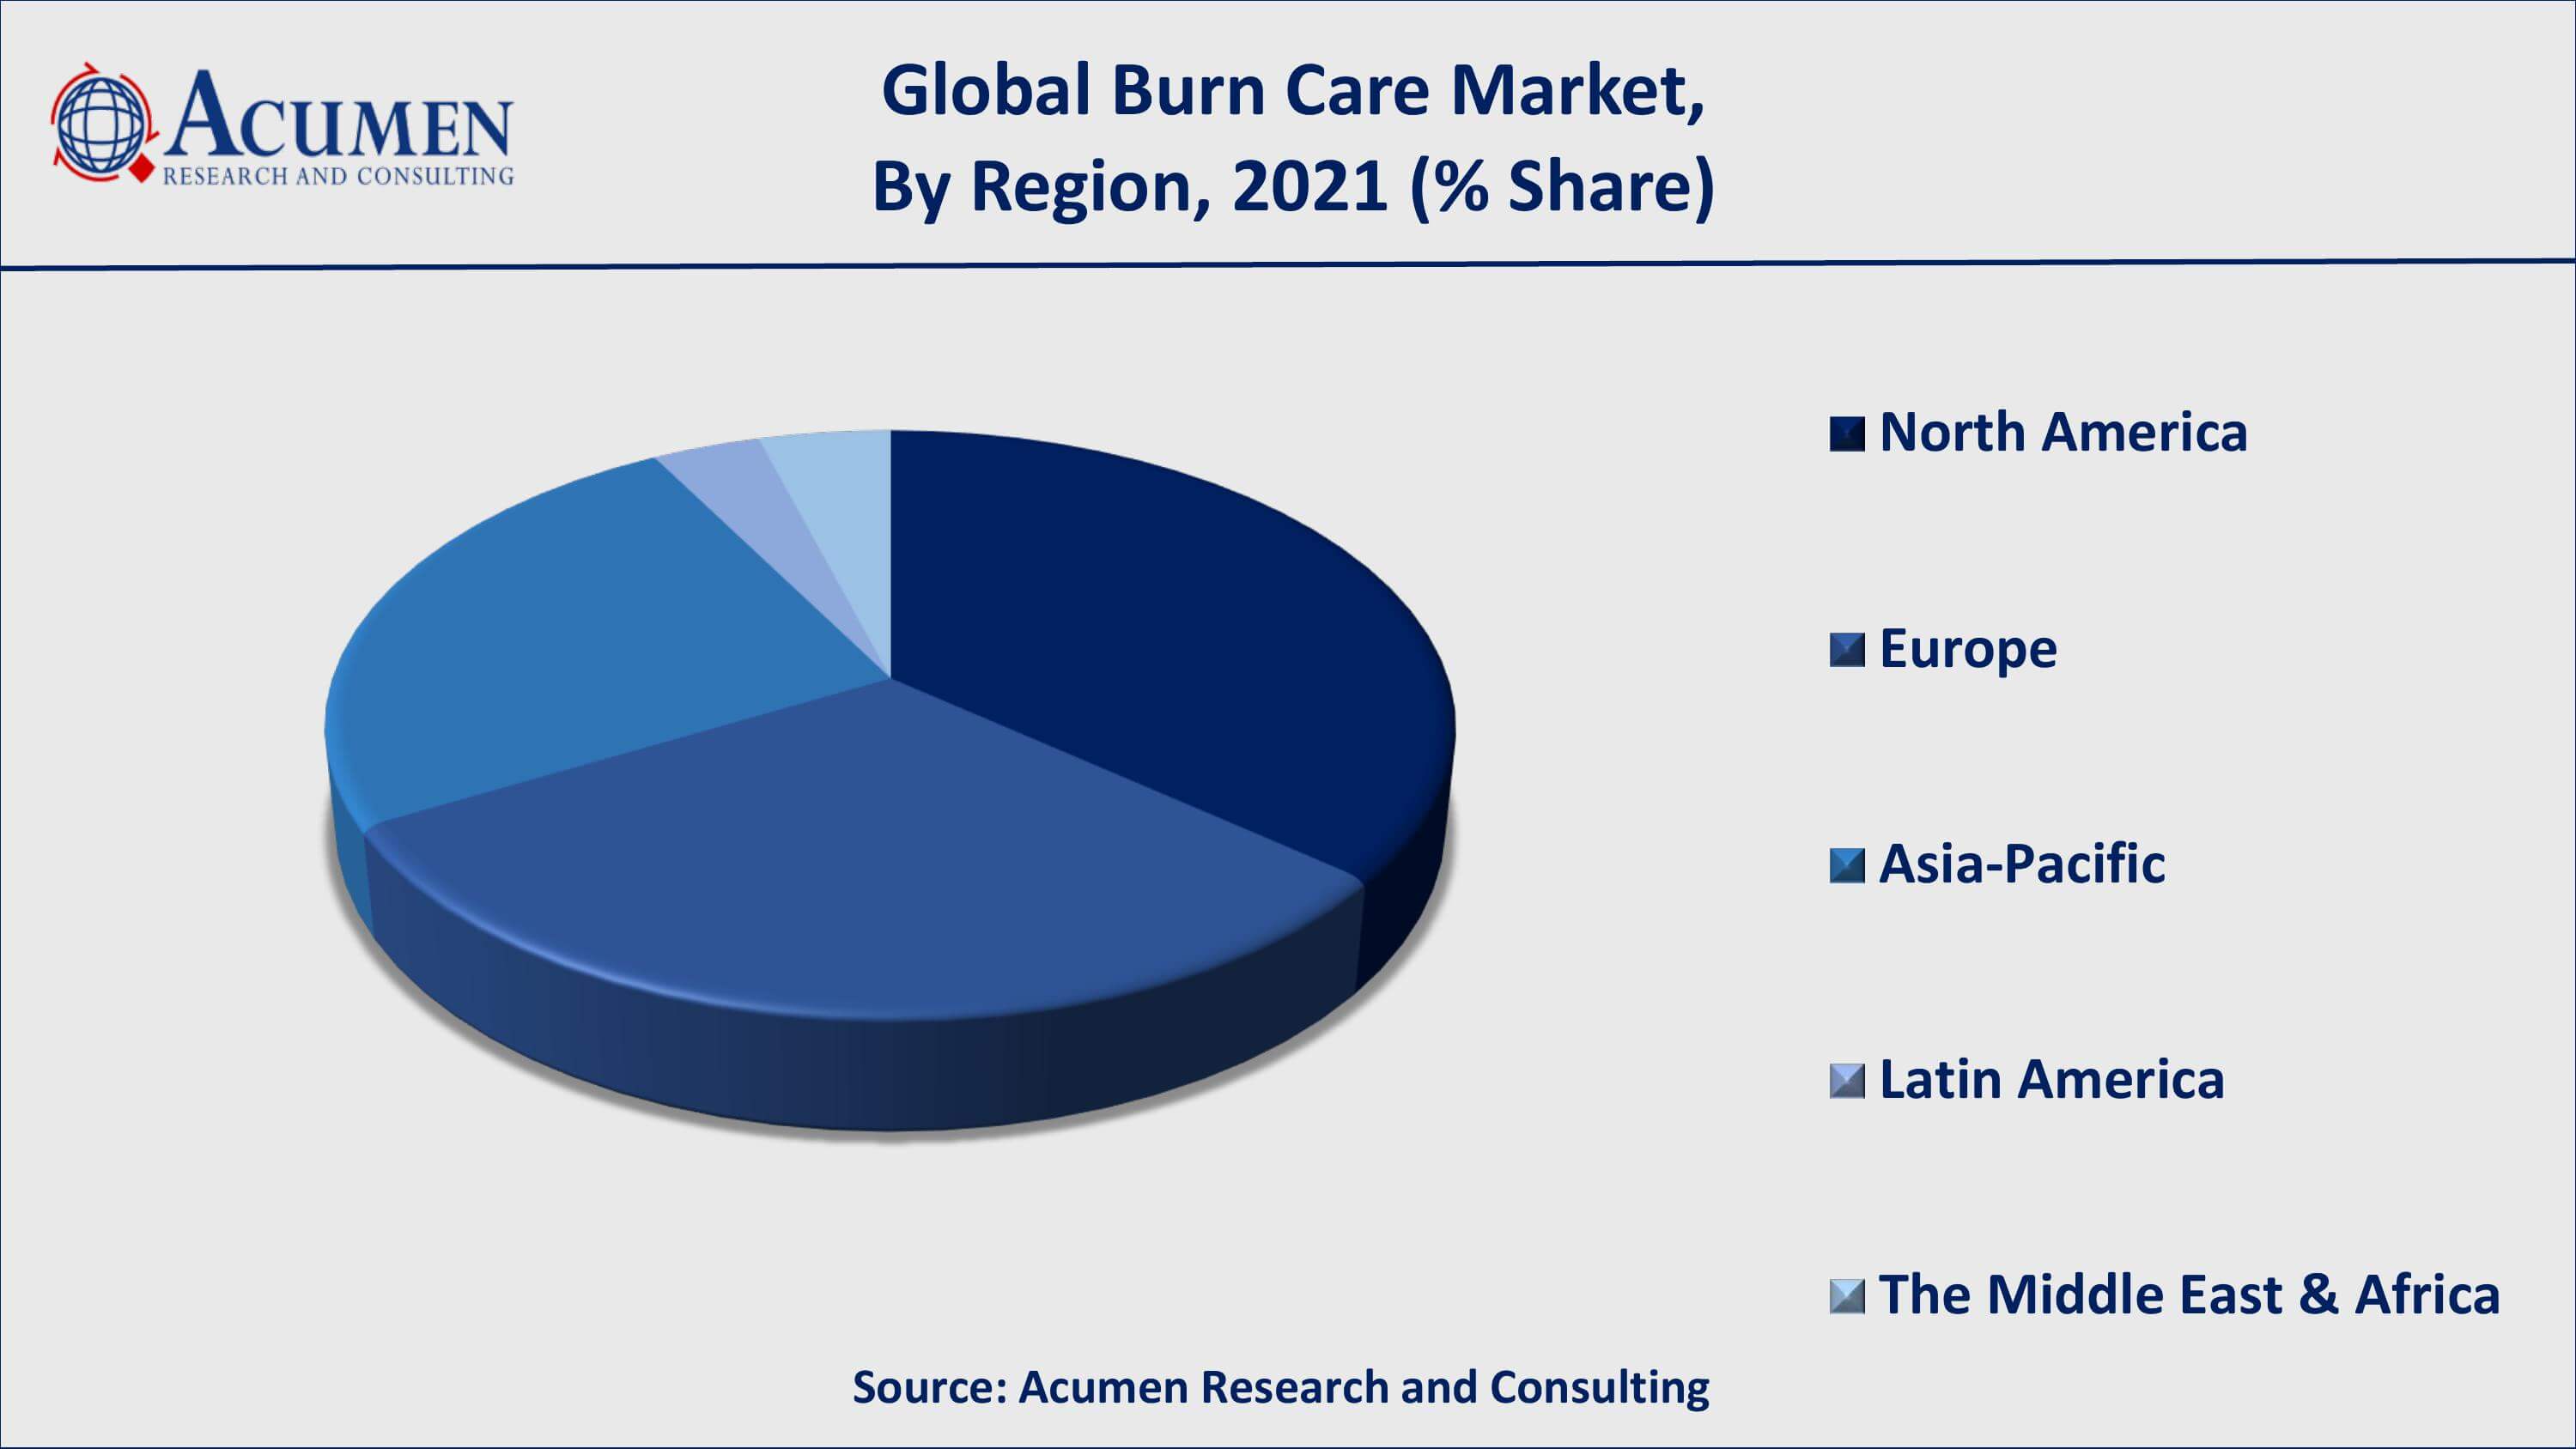 Increasing cases of burn injuries will fuel the global burn care market value